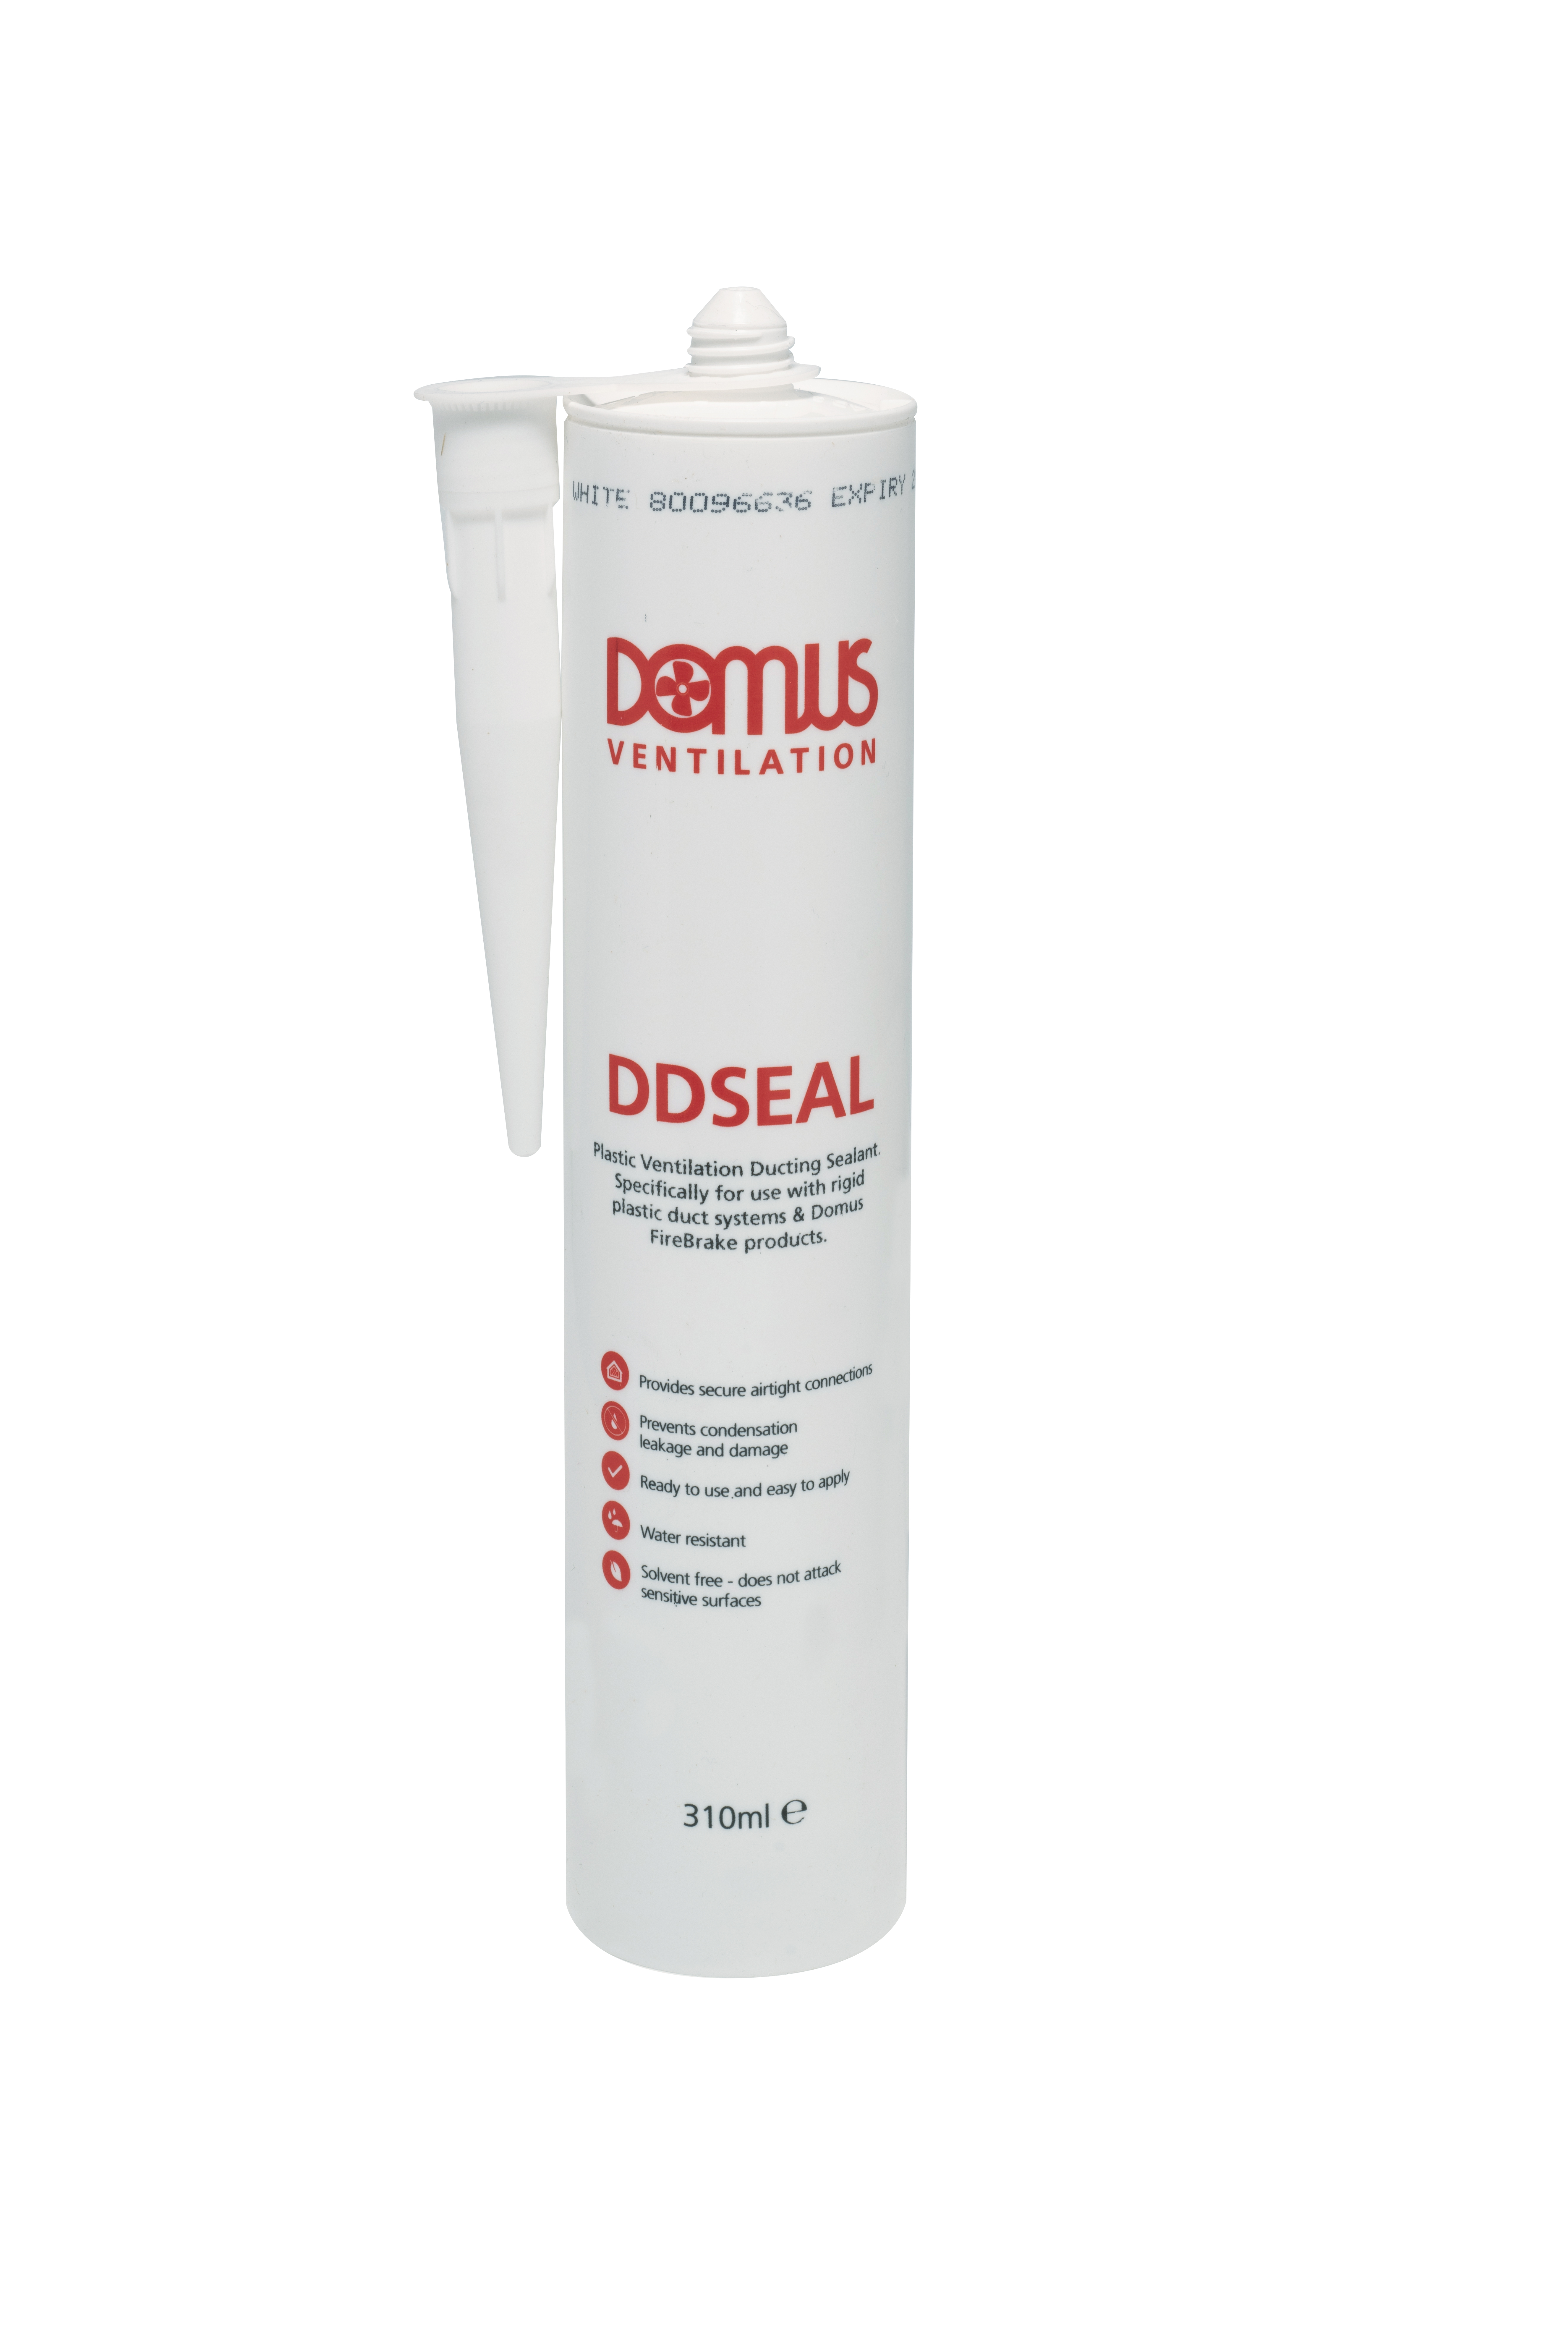 Rigid Duct Intumescent Sealant – available in 310ml size